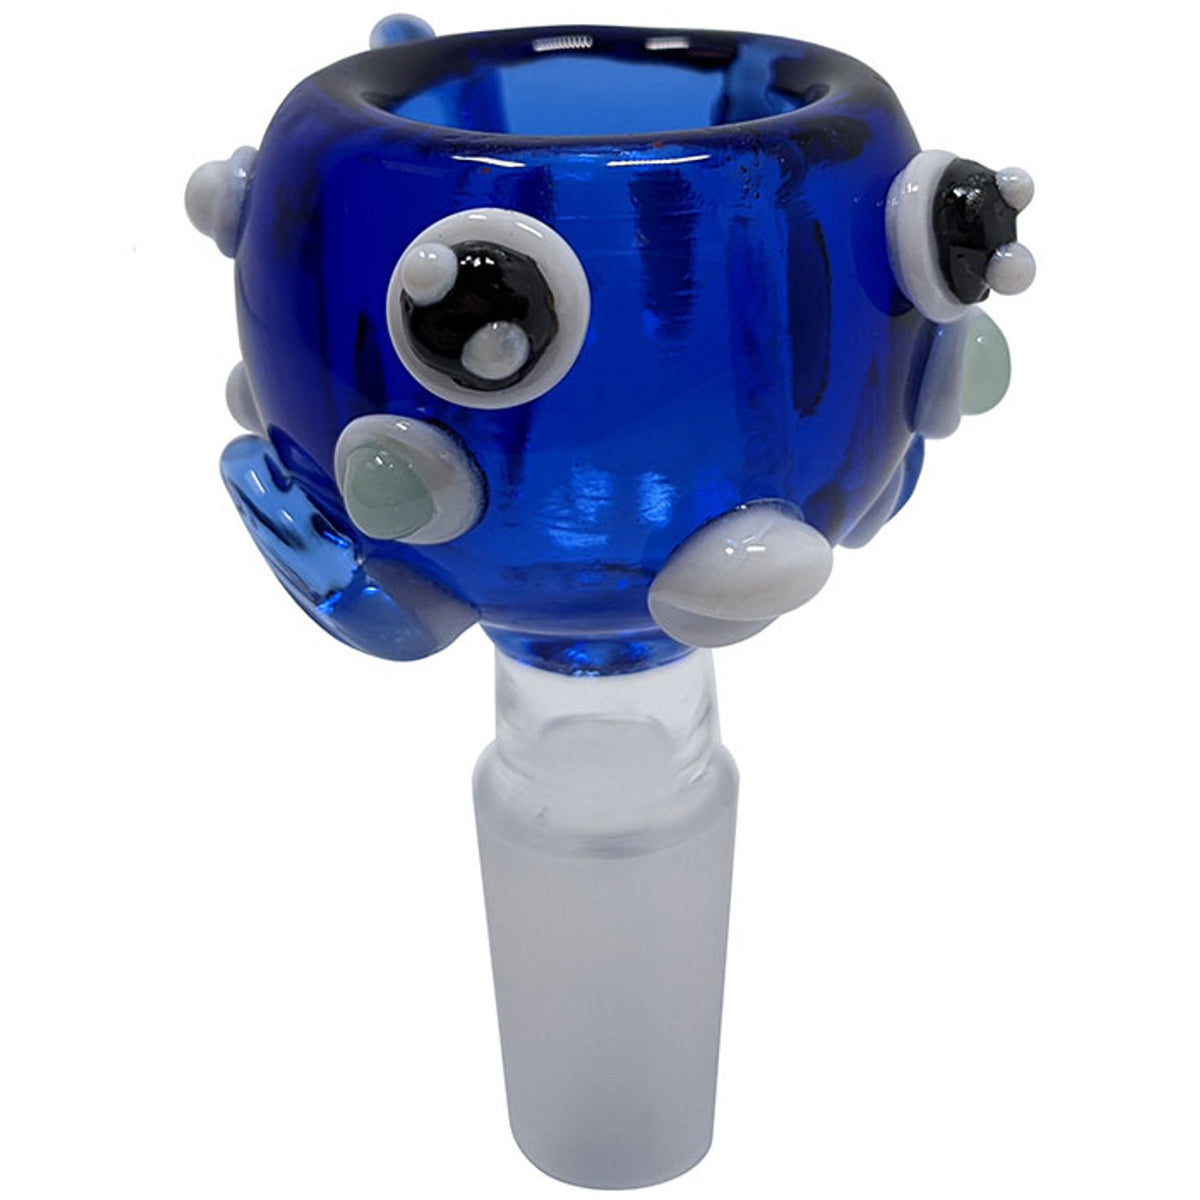 Full Color Fish Bowl - 14mm Male